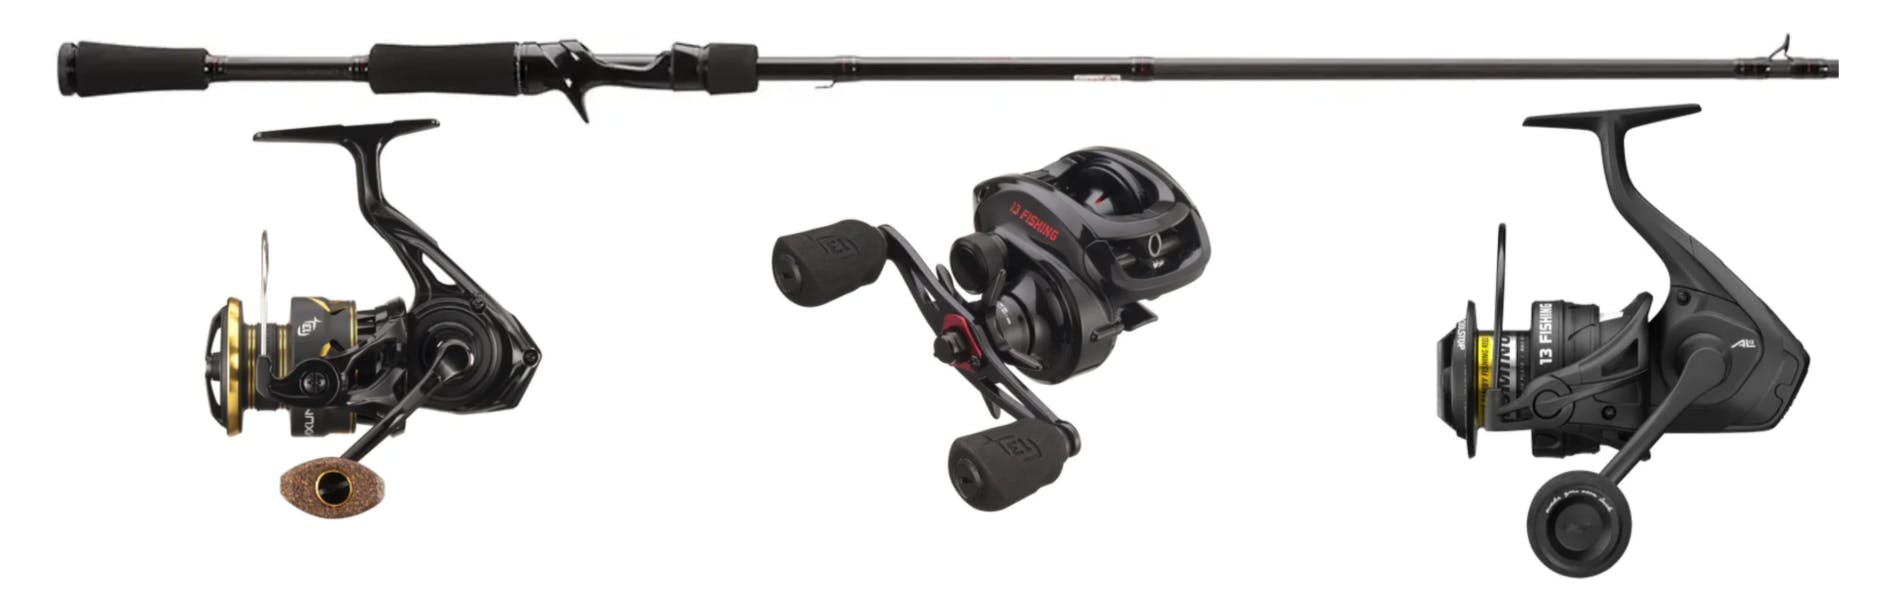 The Most Exciting New Gear from 13 Fishing for 2022